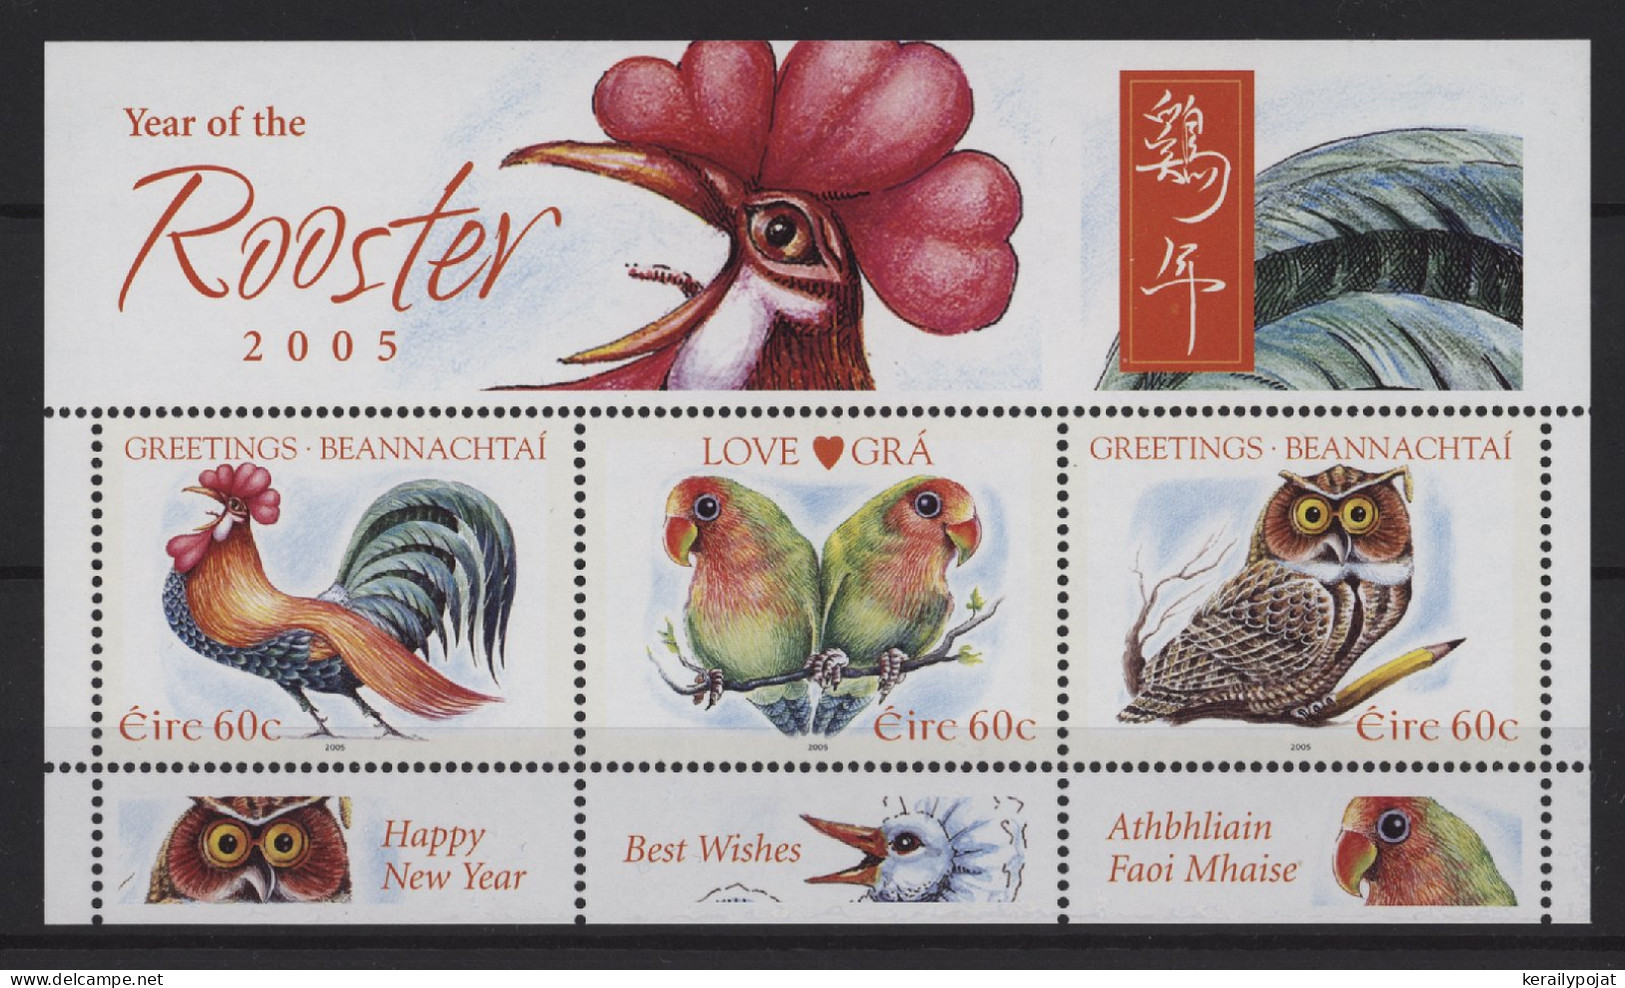 Ireland - 2005 Year Of The Rooster Block MNH__(TH-25956) - Blocks & Sheetlets